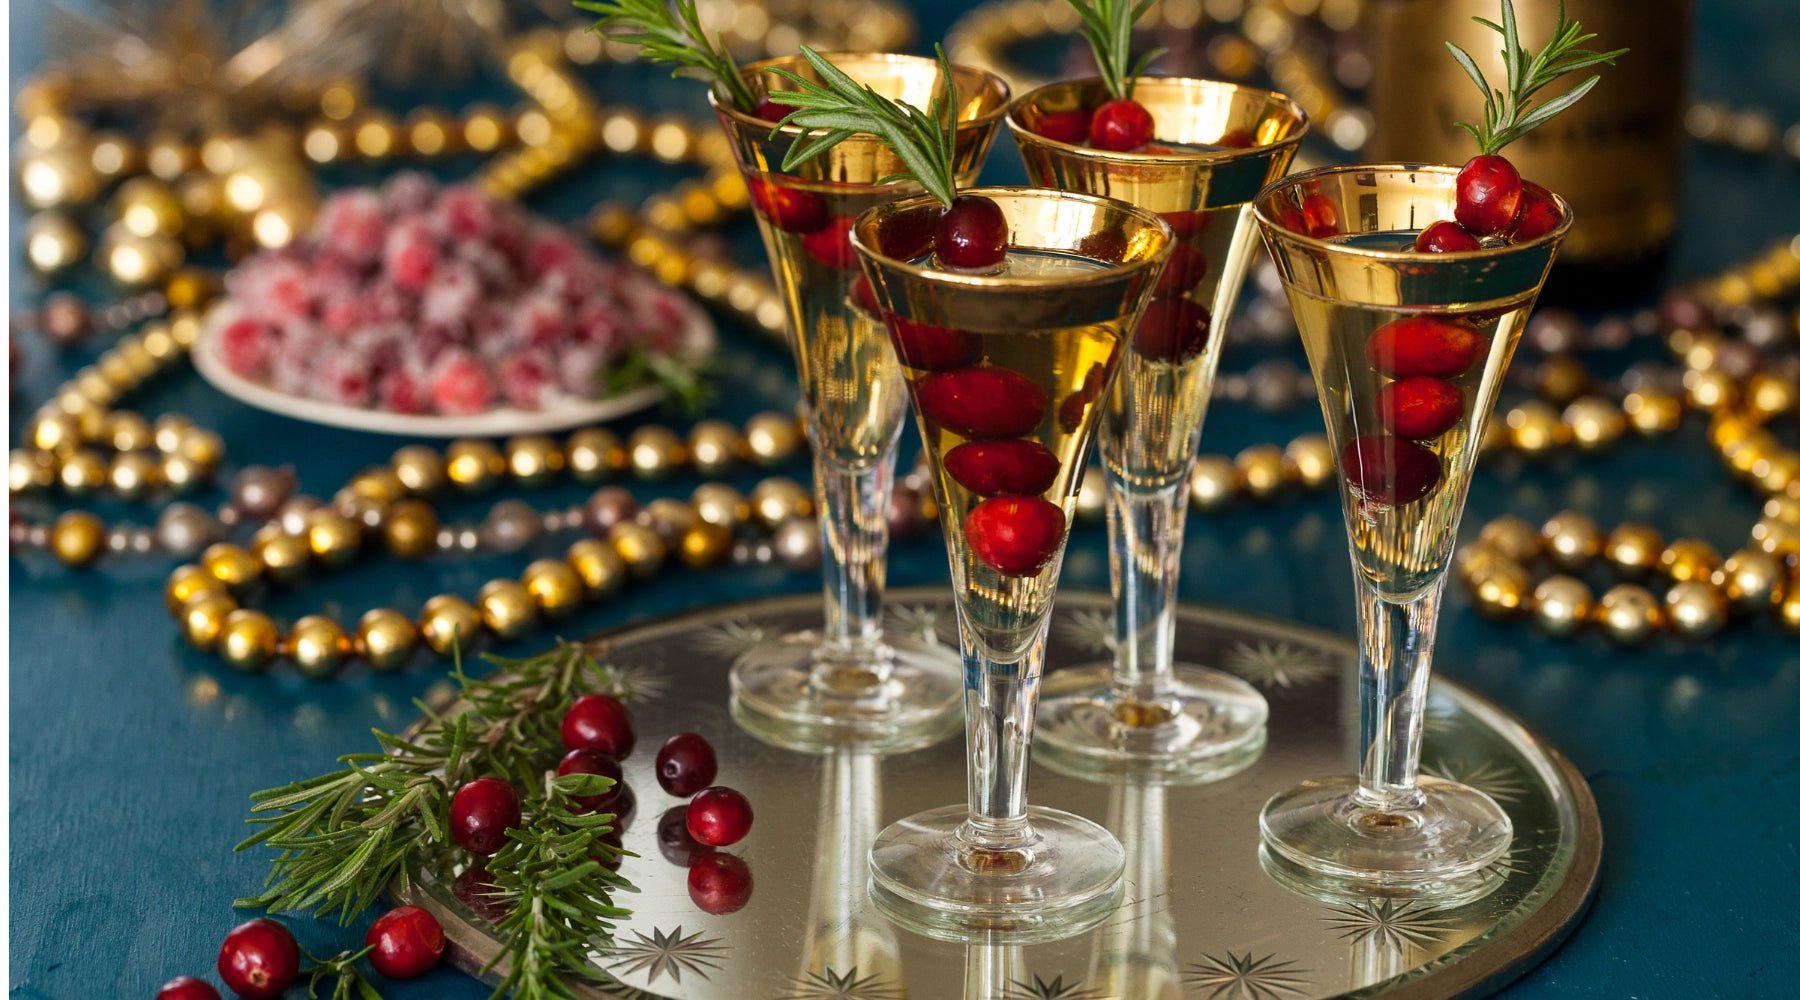 Top 5 Festive Holiday Drink Recipes 2022 | Easy to make cocktails - Views Balcony Bar | Turn your Balcony into a Bar!